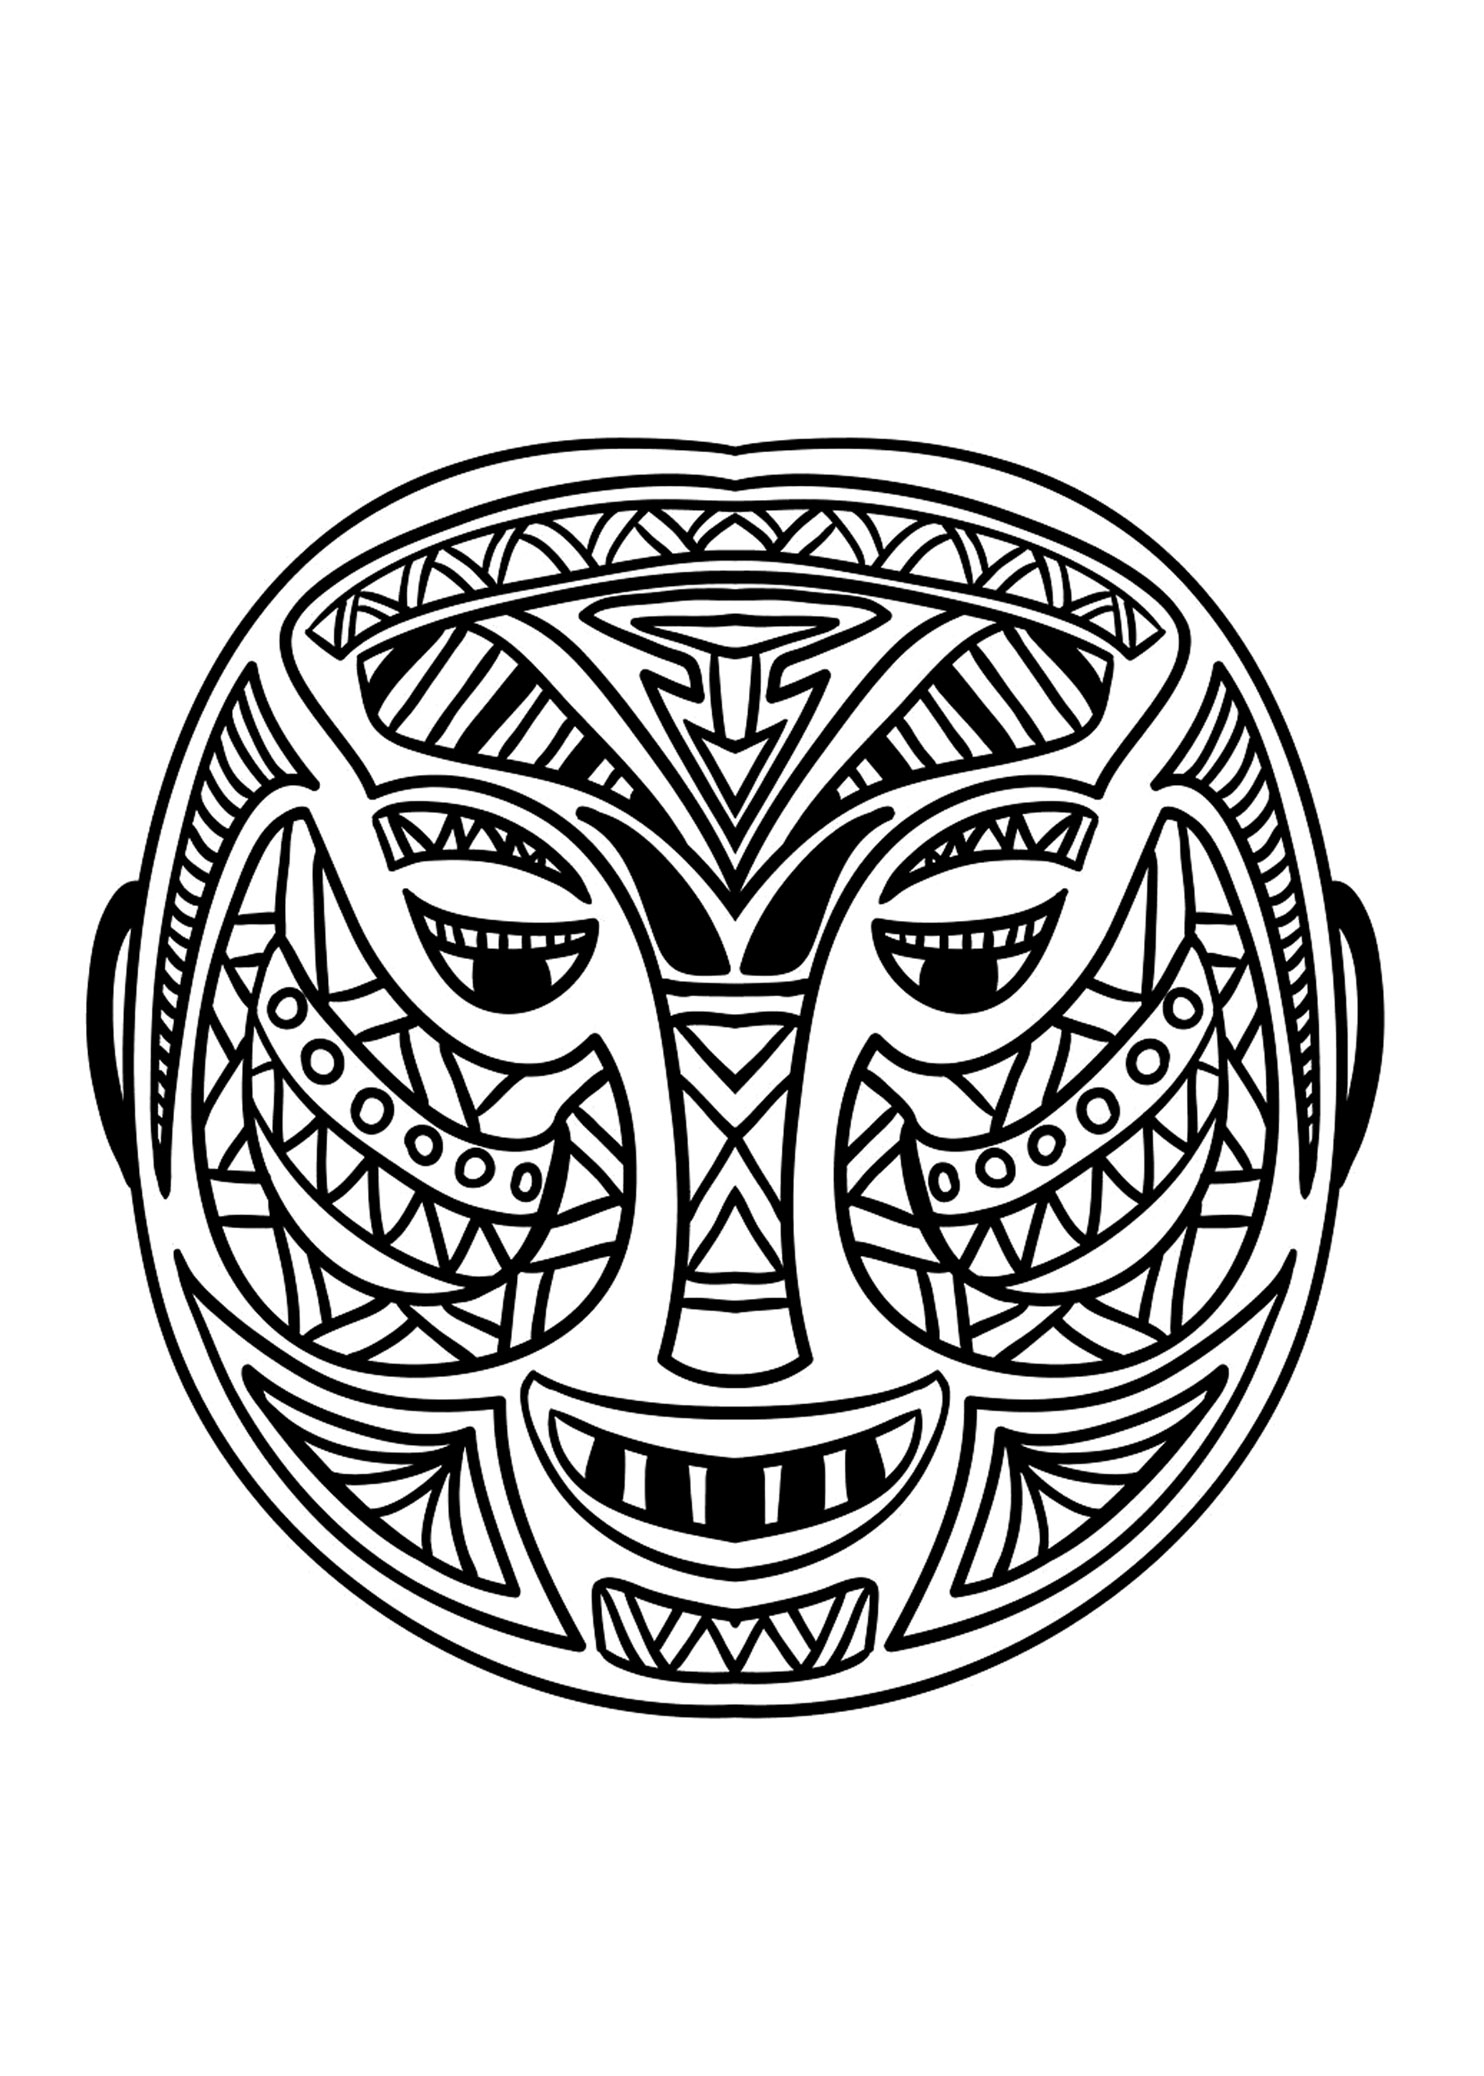 African mask 5 - Africa Adult Coloring Pages - Page 2/